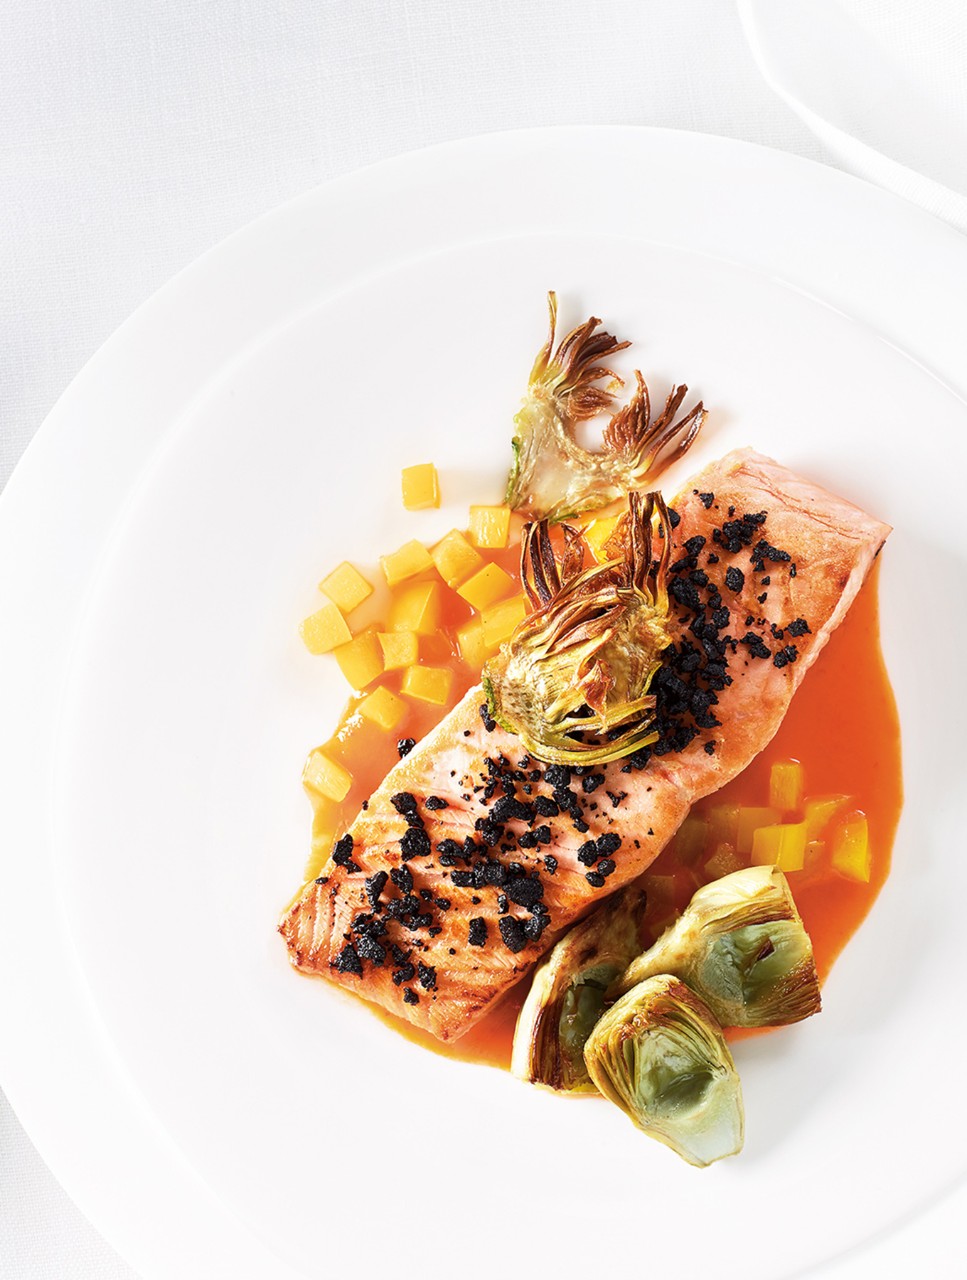 Cured Salmon with Sweet & Sour Pepper Sauce, Artichokes & Black-Olive Crumb